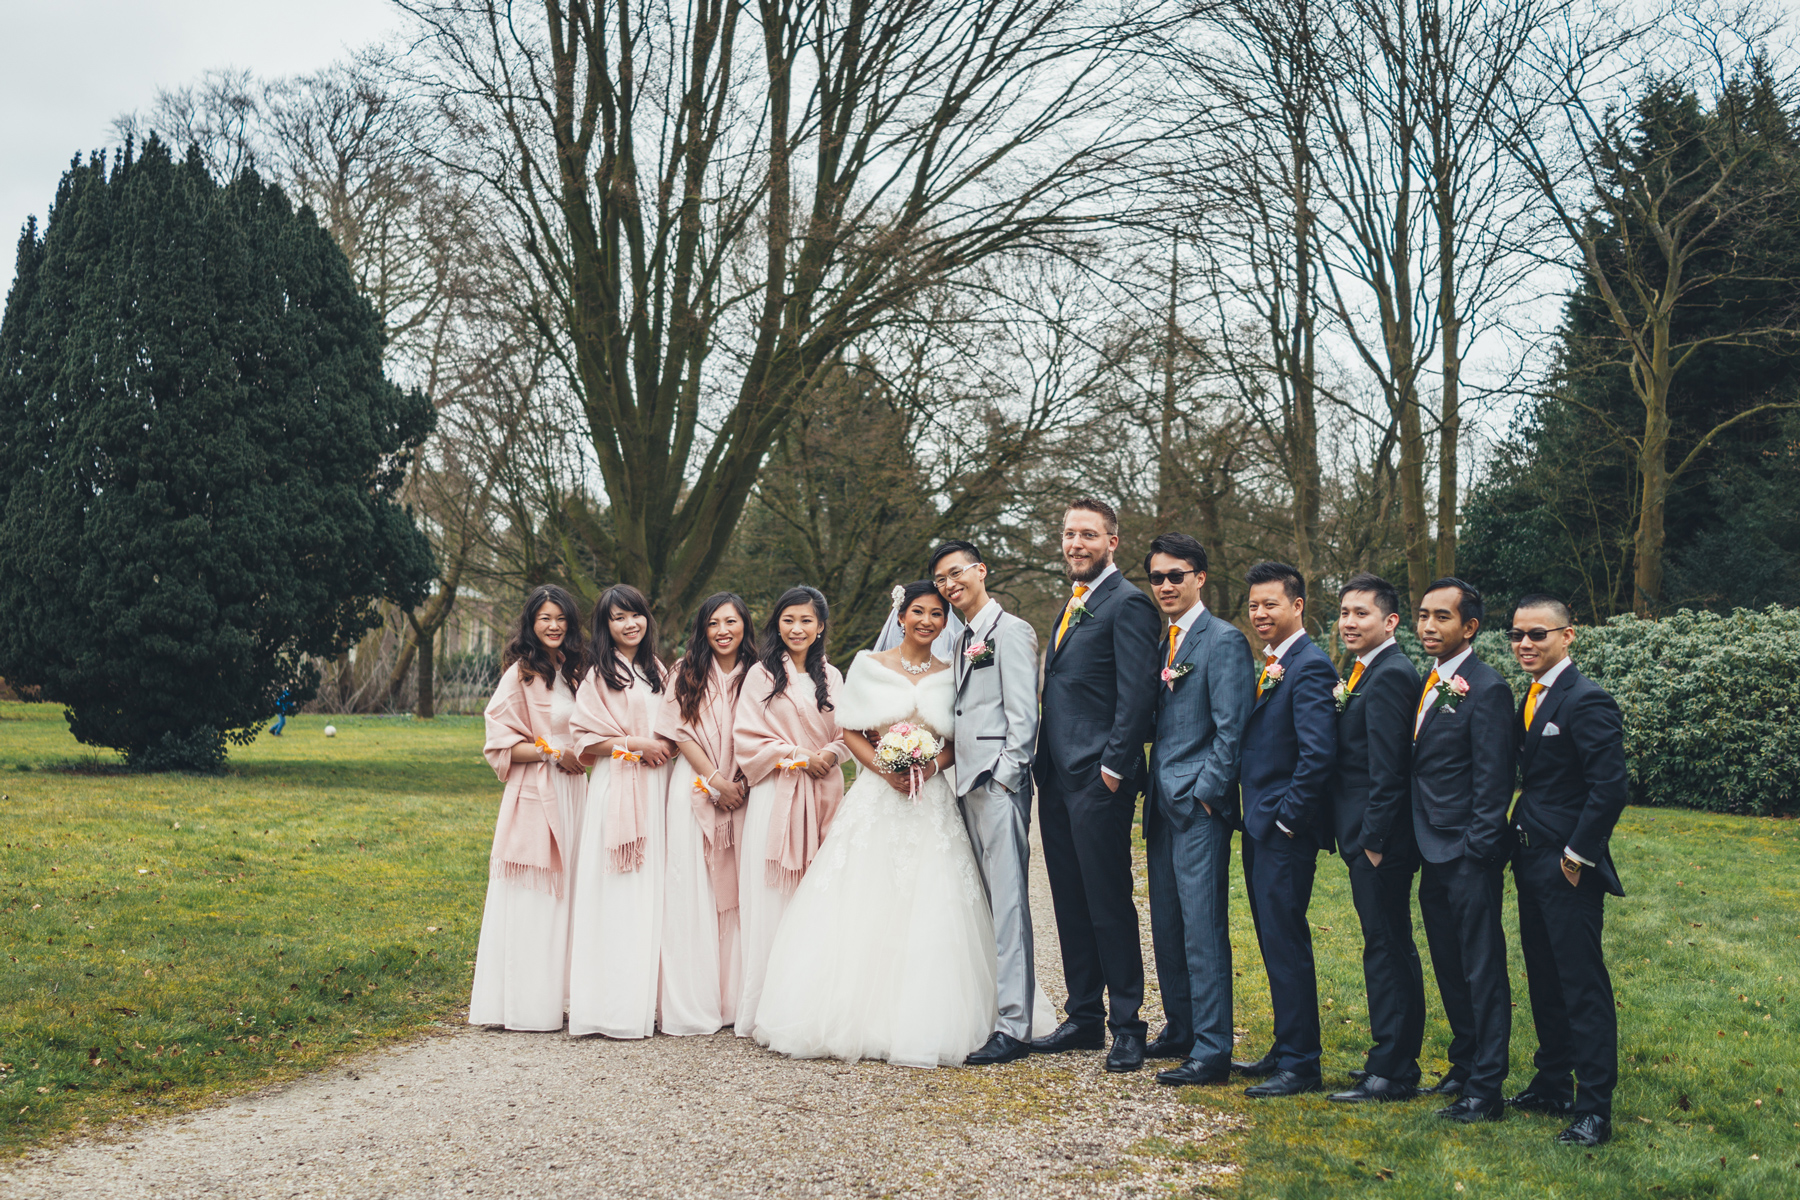 Bridal-party, wedding photography: Melvin & Jessica, by José Chan